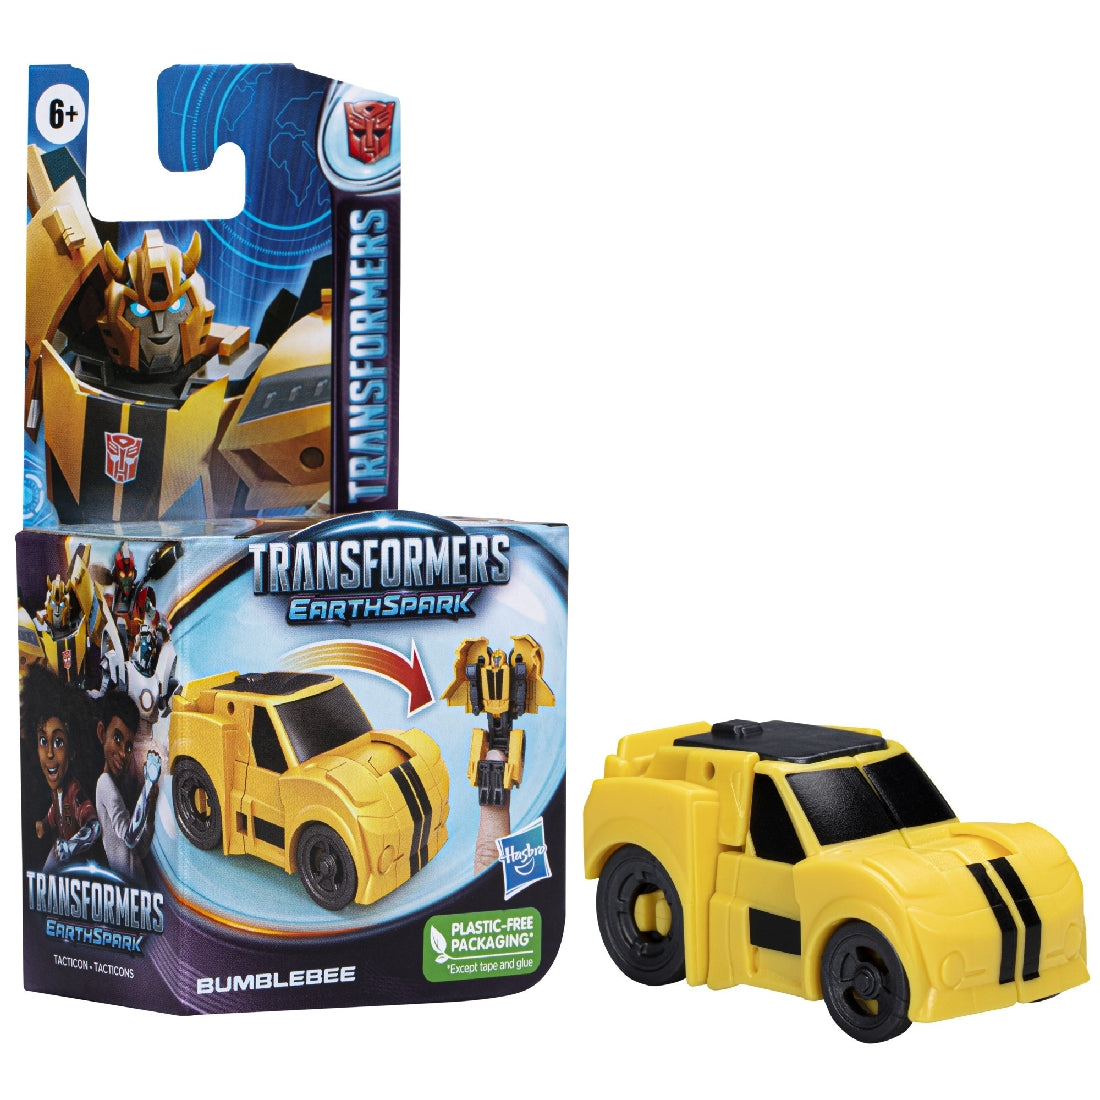 TRANSFORMERS EARTHSPARK TACTICON AST - BUMBLEBEE